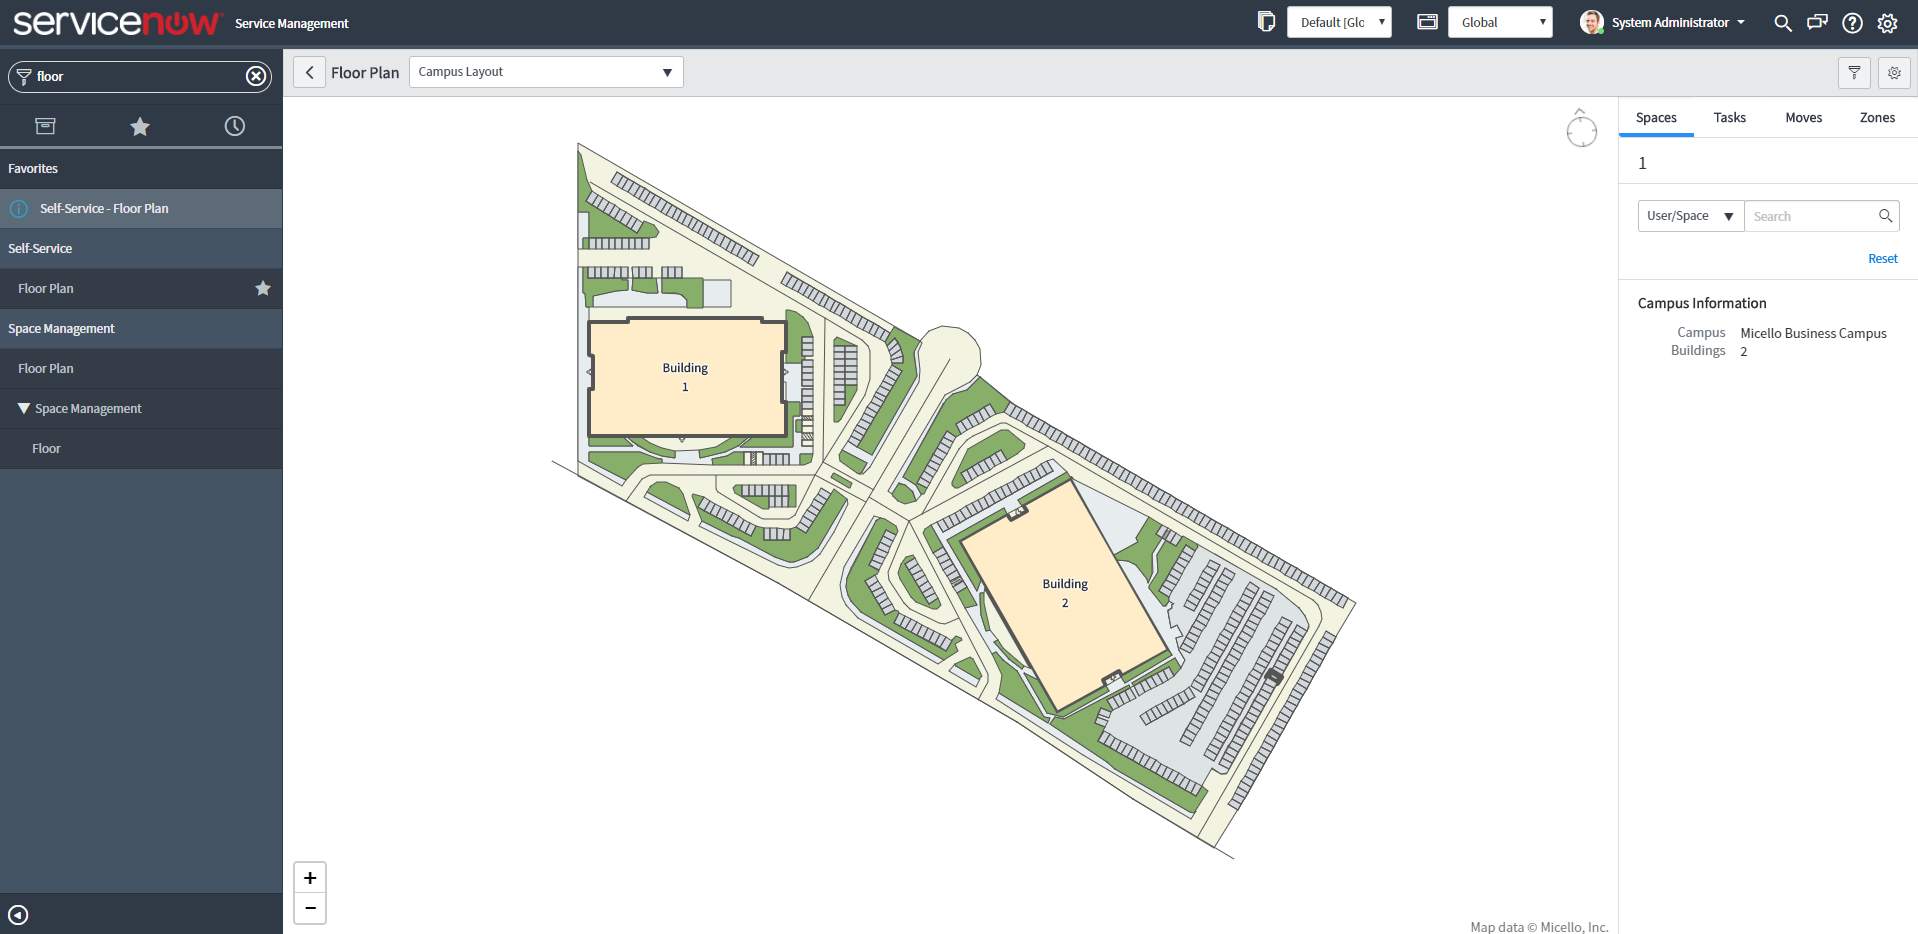 Interactive and Overall Facility Site Maps by the Now Platform